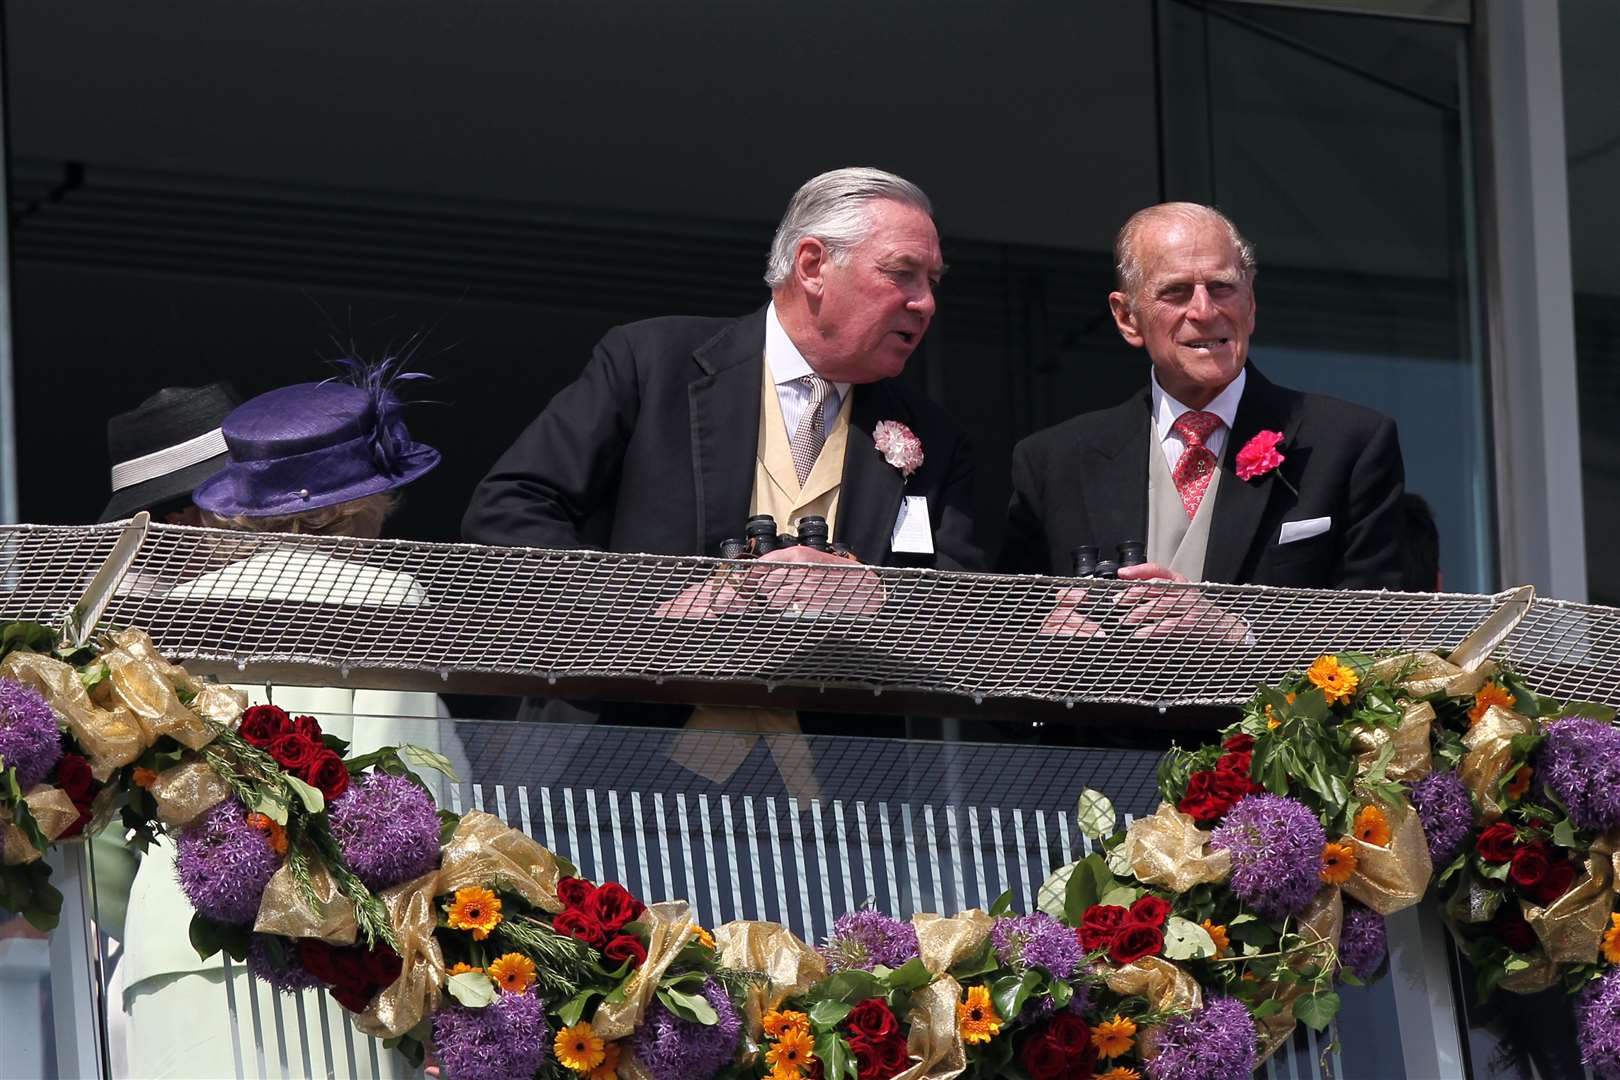 Lord Samuel Vestey and the Duke of Edinburgh on the balcony for the Investec Derby at Epsom Downs Racecourse (PA)